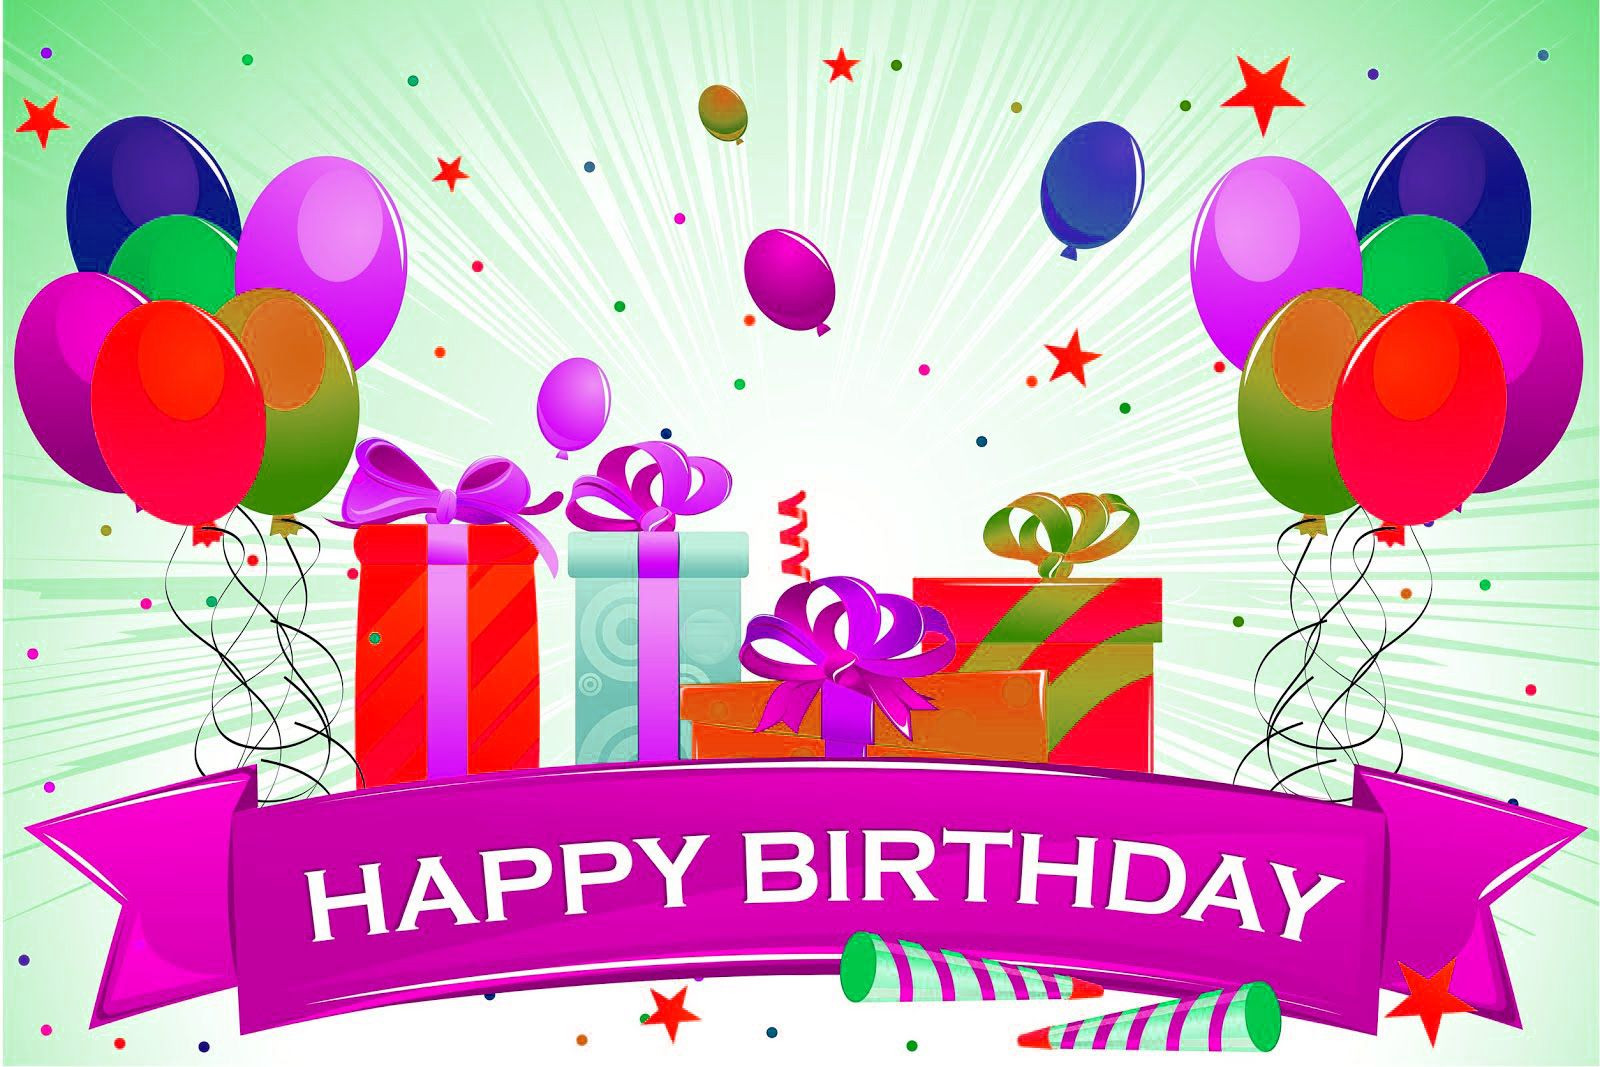 Internet Birthday Cards
 birthday cards online HD Wallpapers Download Free birthday